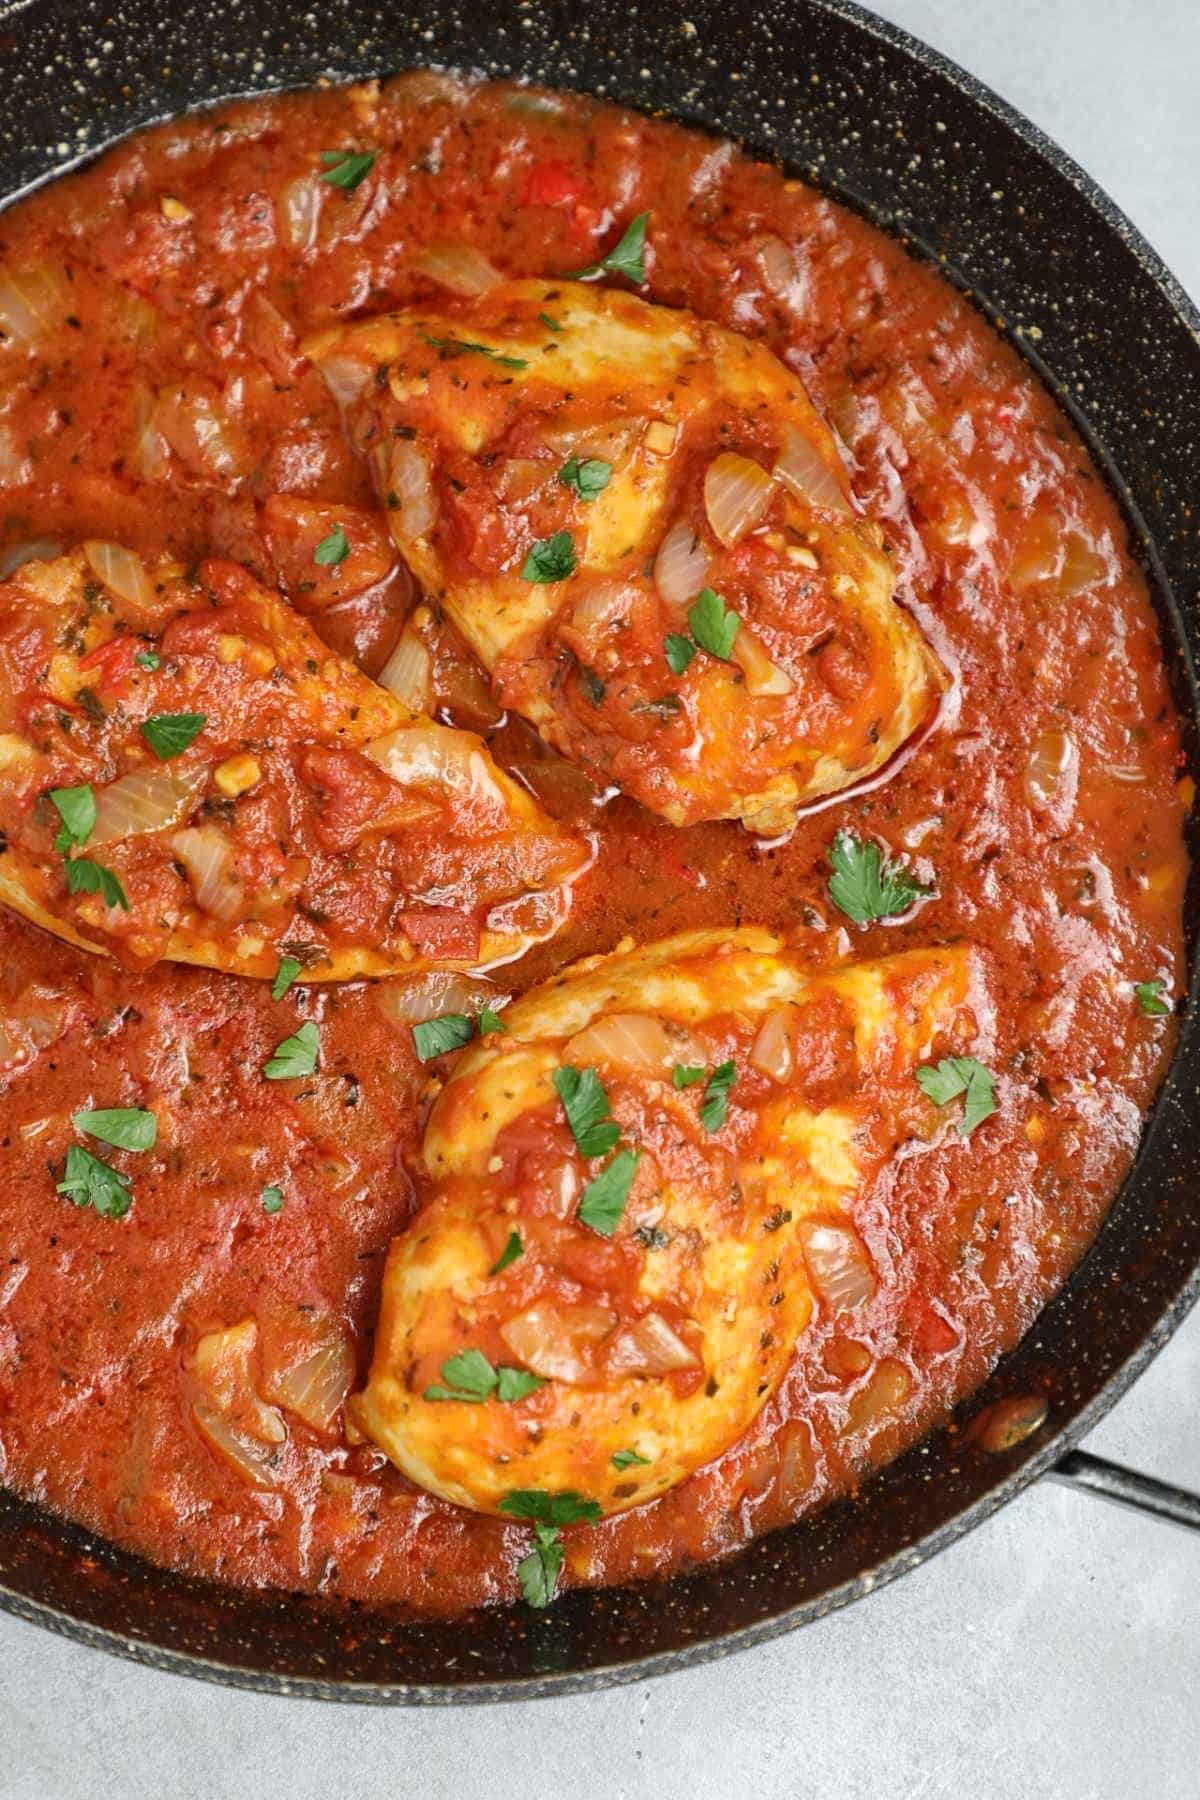 the cooked chicken in tomato sauce in a skillet.